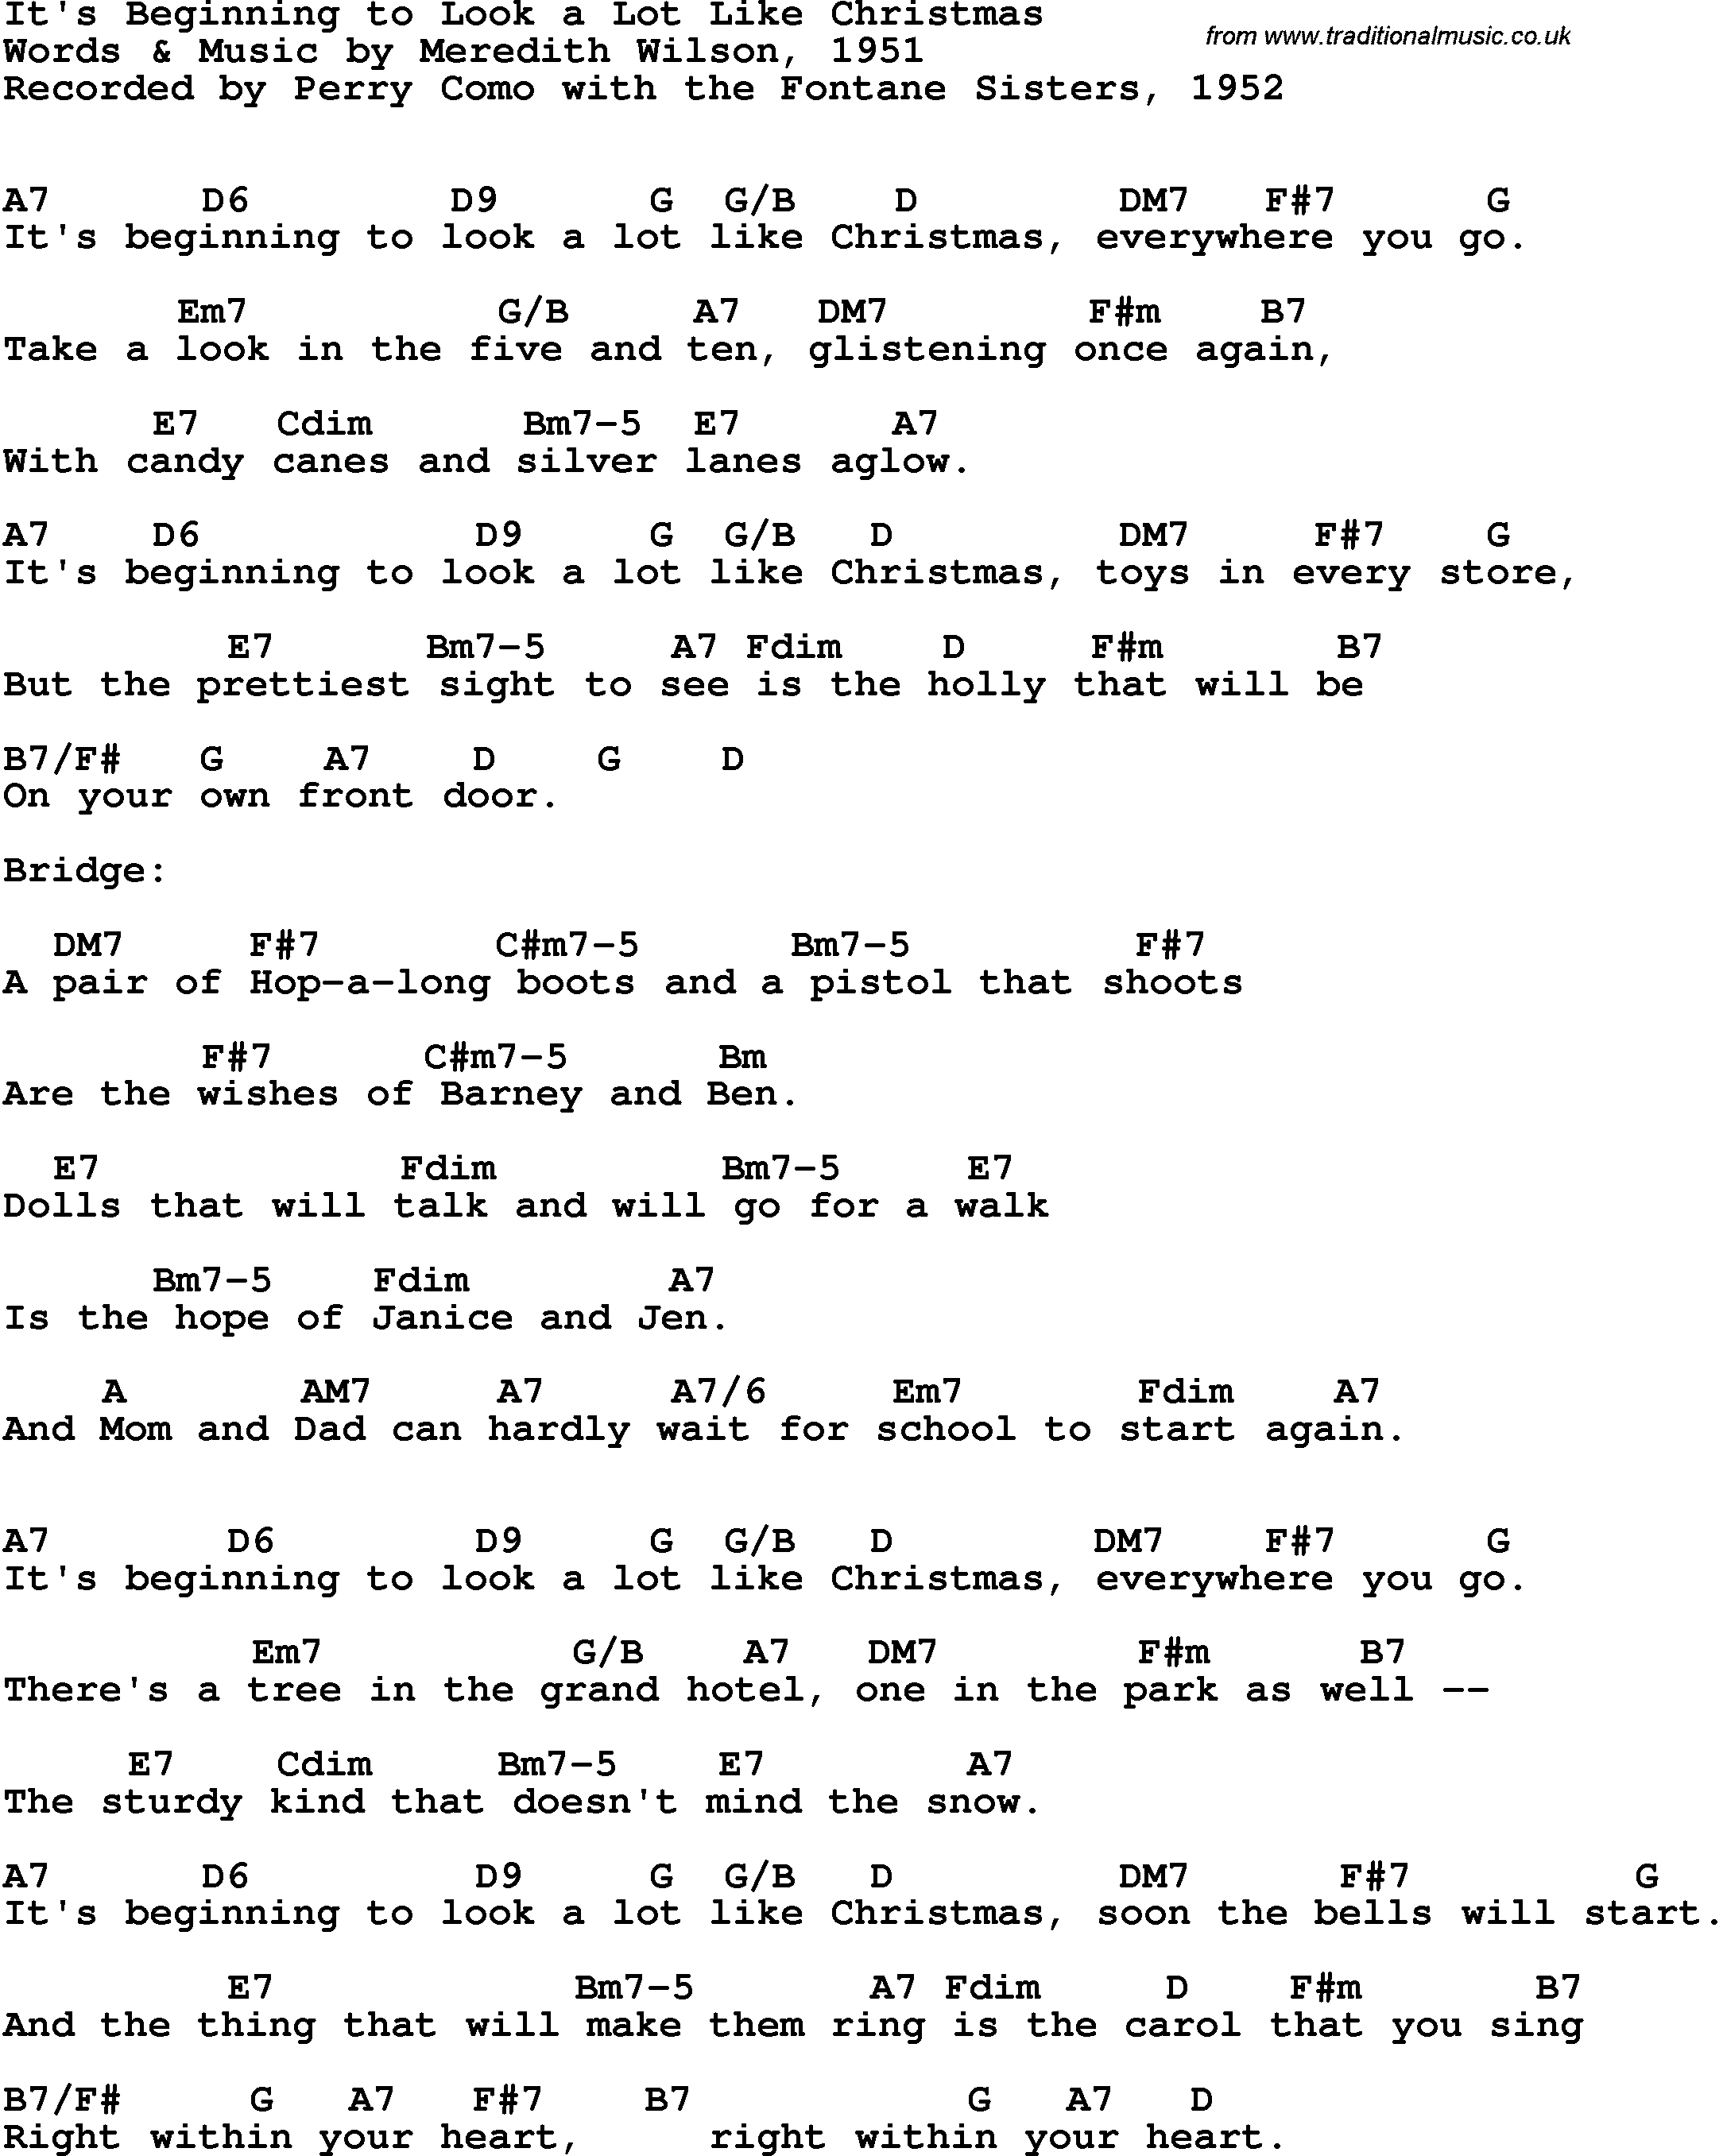 Song Lyrics with guitar chords for It's Beginning To Look A Lot Like Christmas - Perry Como & The Andrews Sisters, 1952